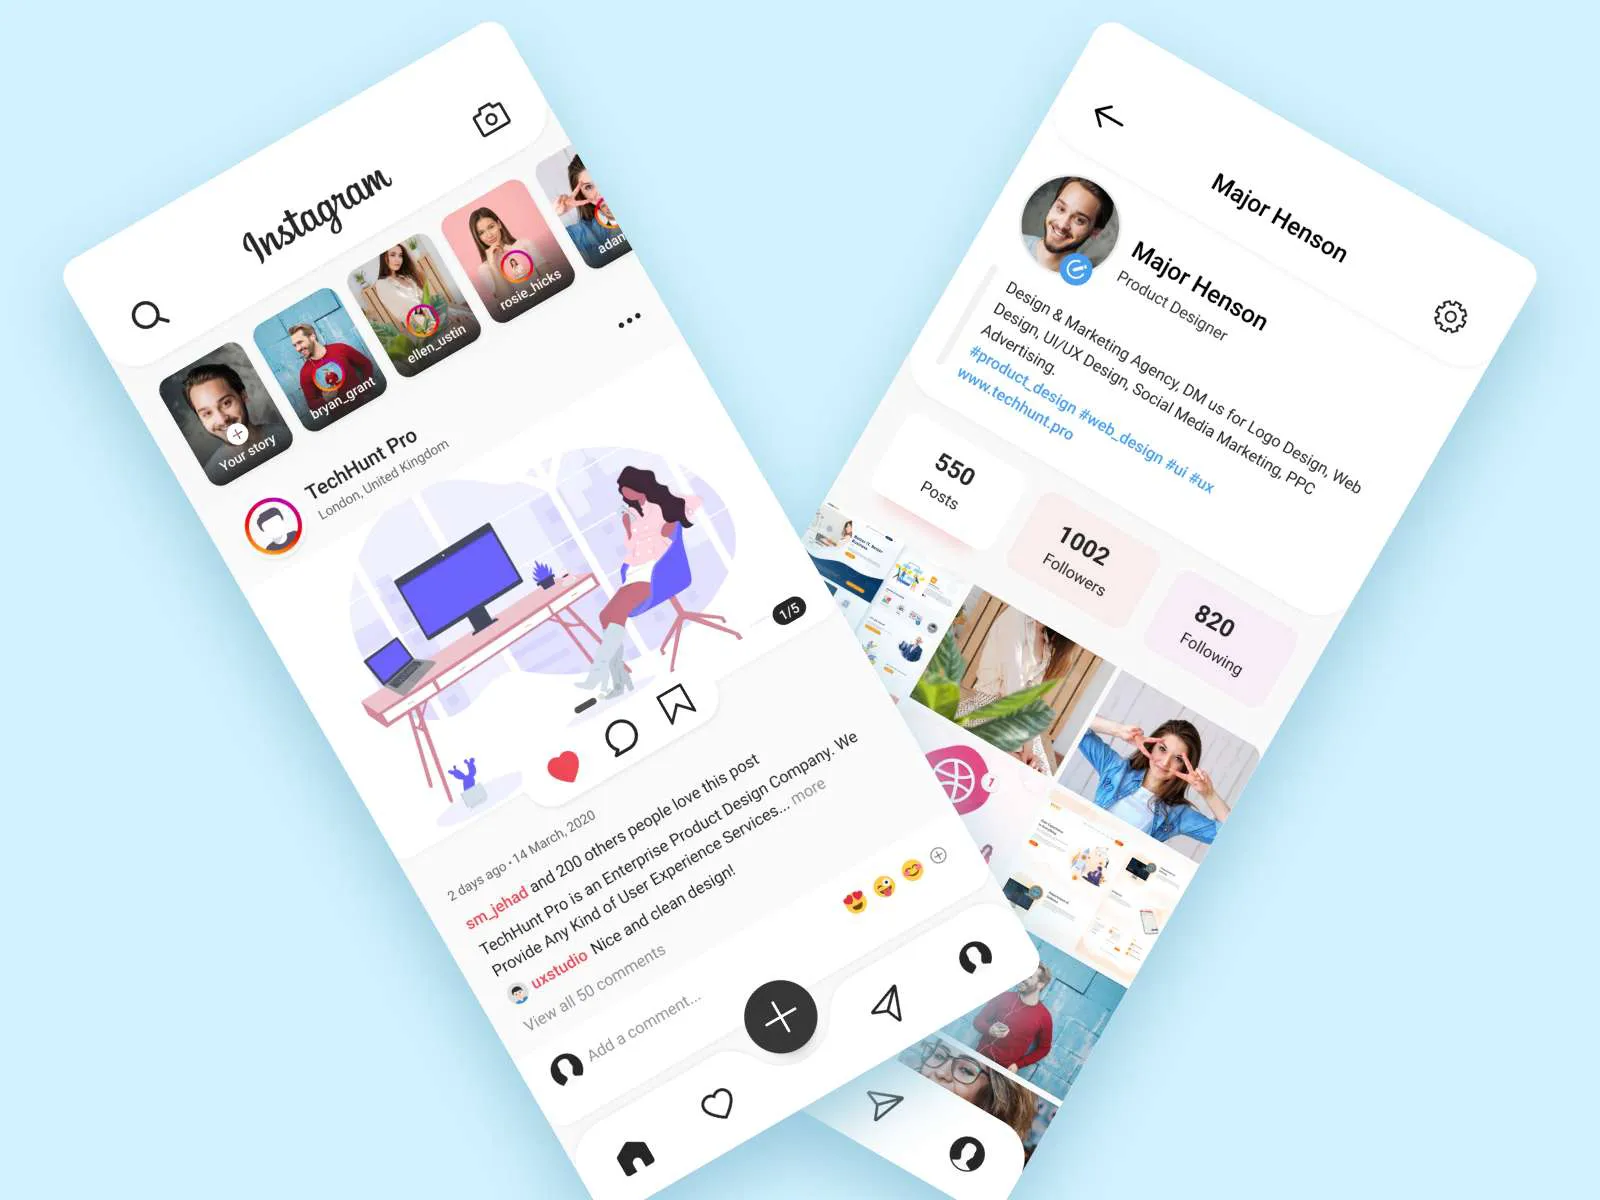 Intagram Redesign Challenge for Figma and Adobe XD No 5